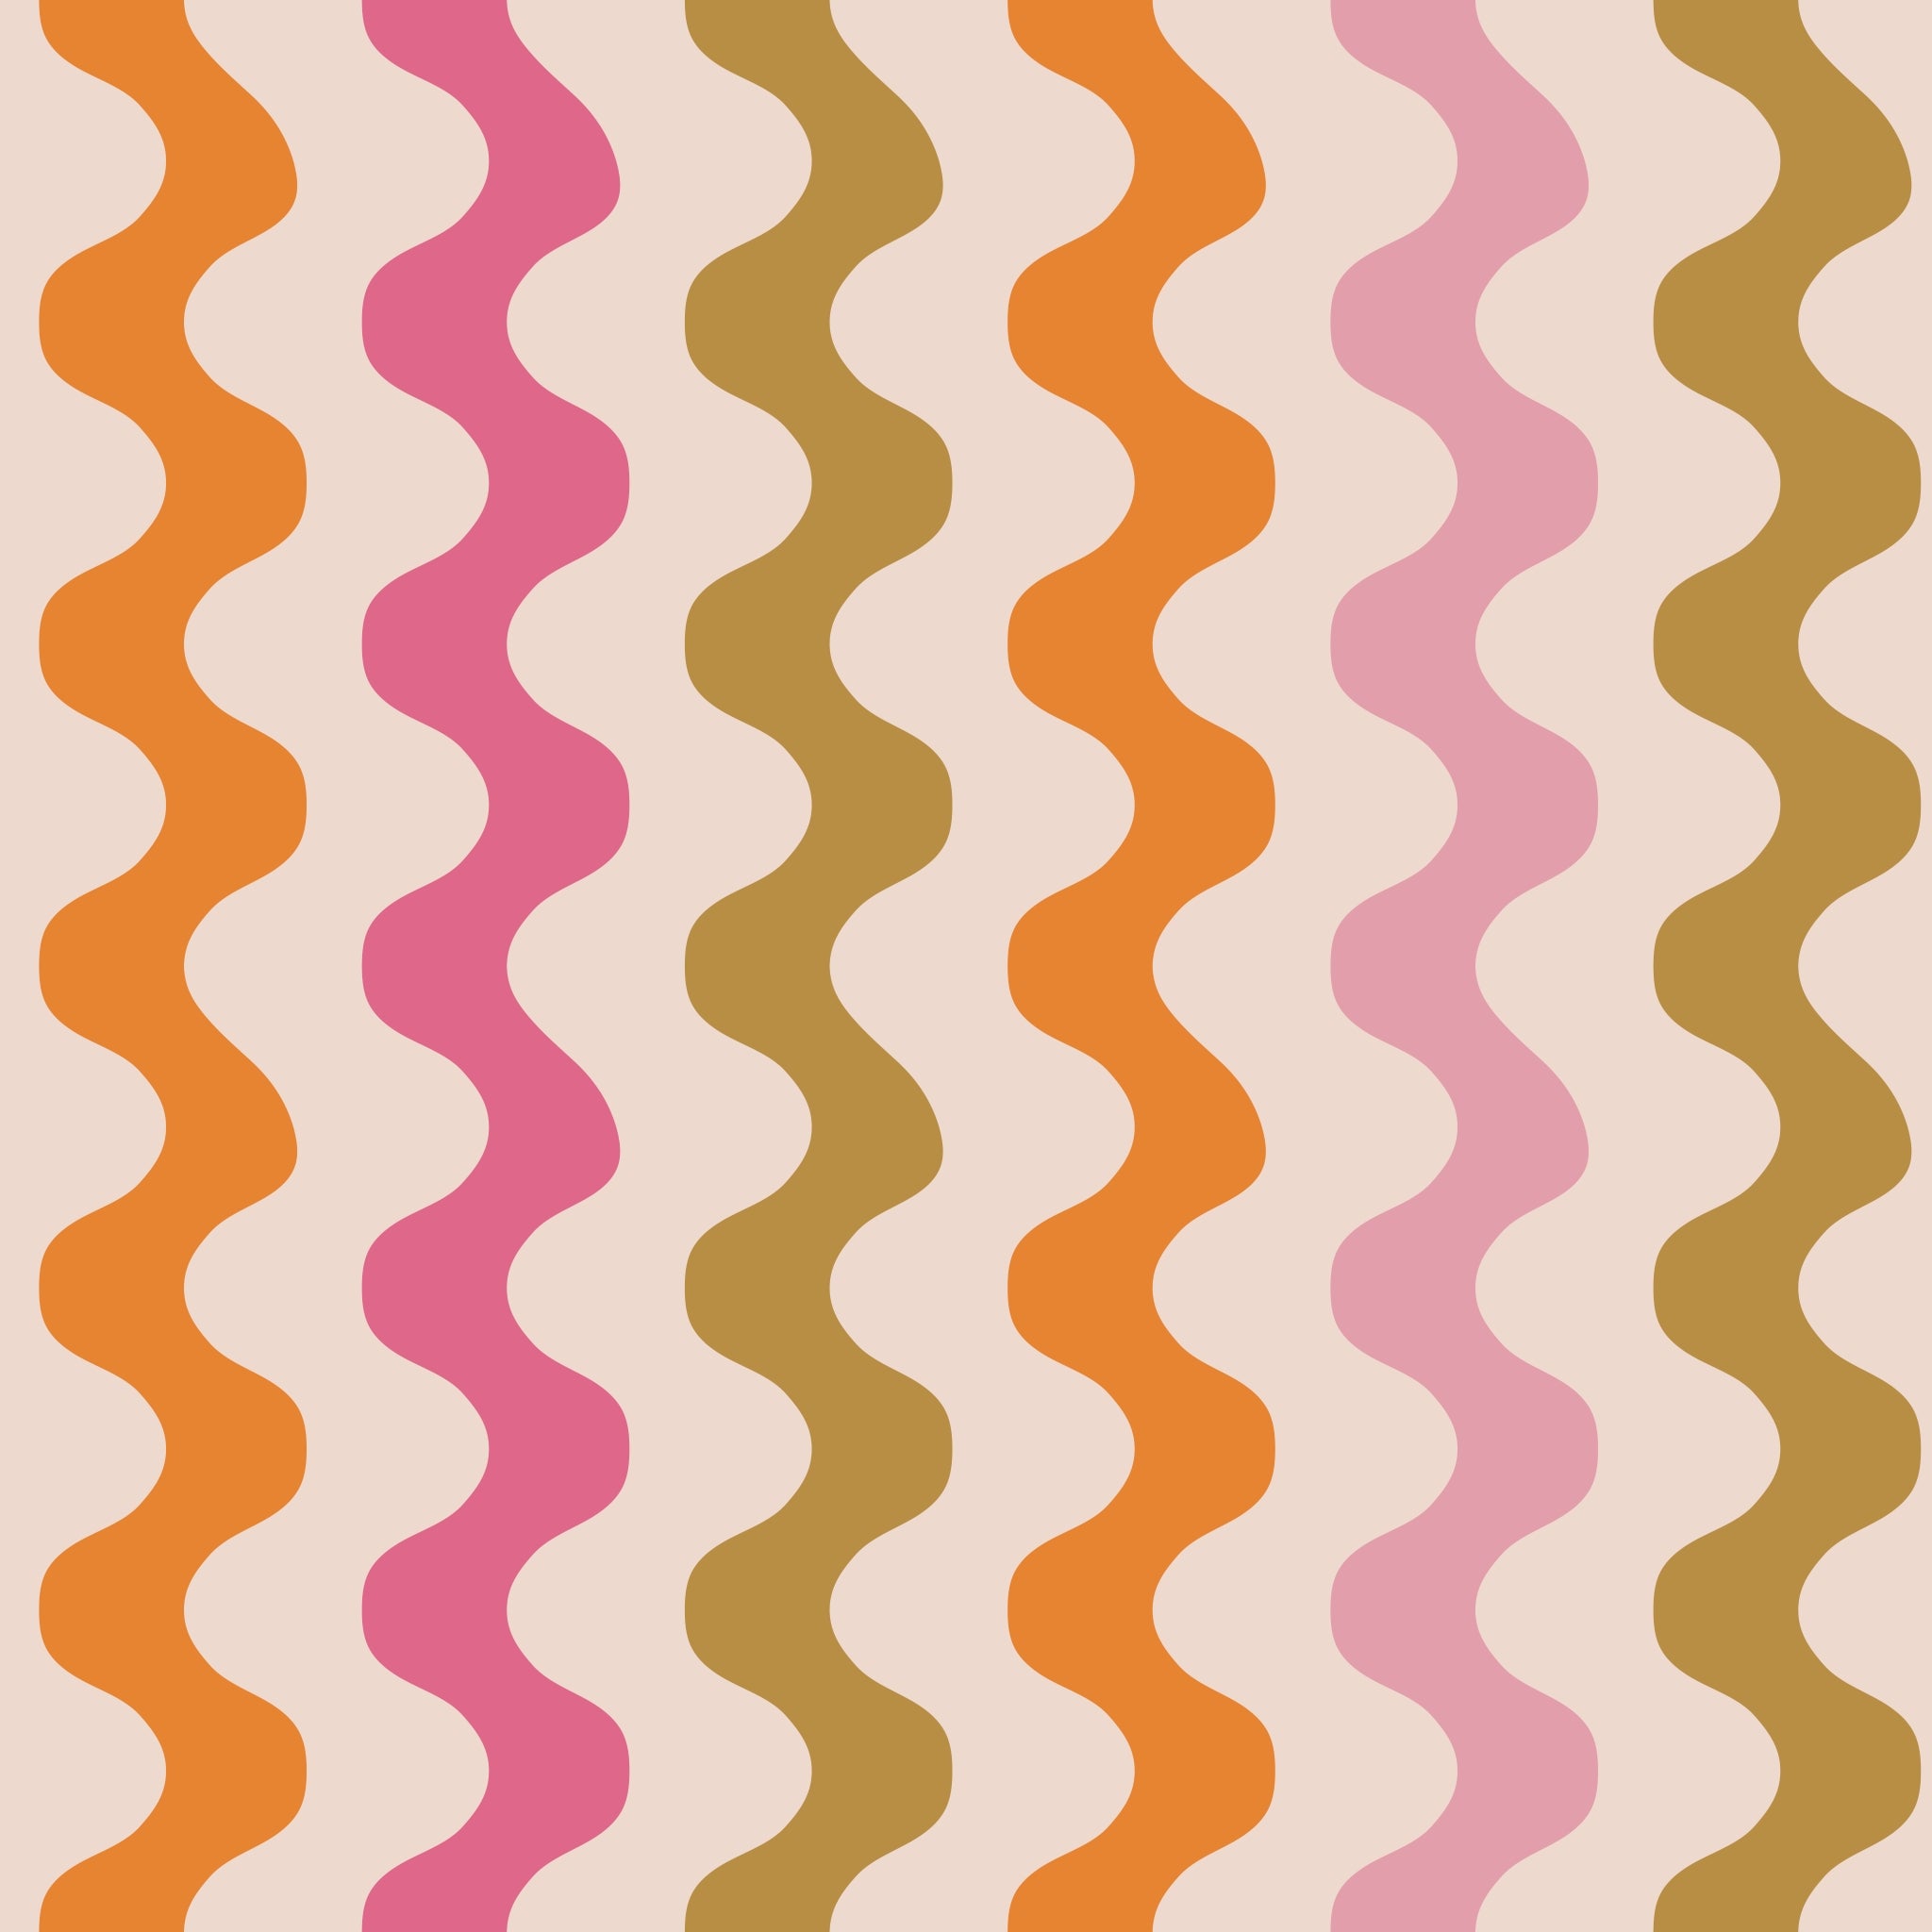 "Polly Wallpaper by Wall Blush showcasing colorful wavy patterns in a contemporary living room setting."